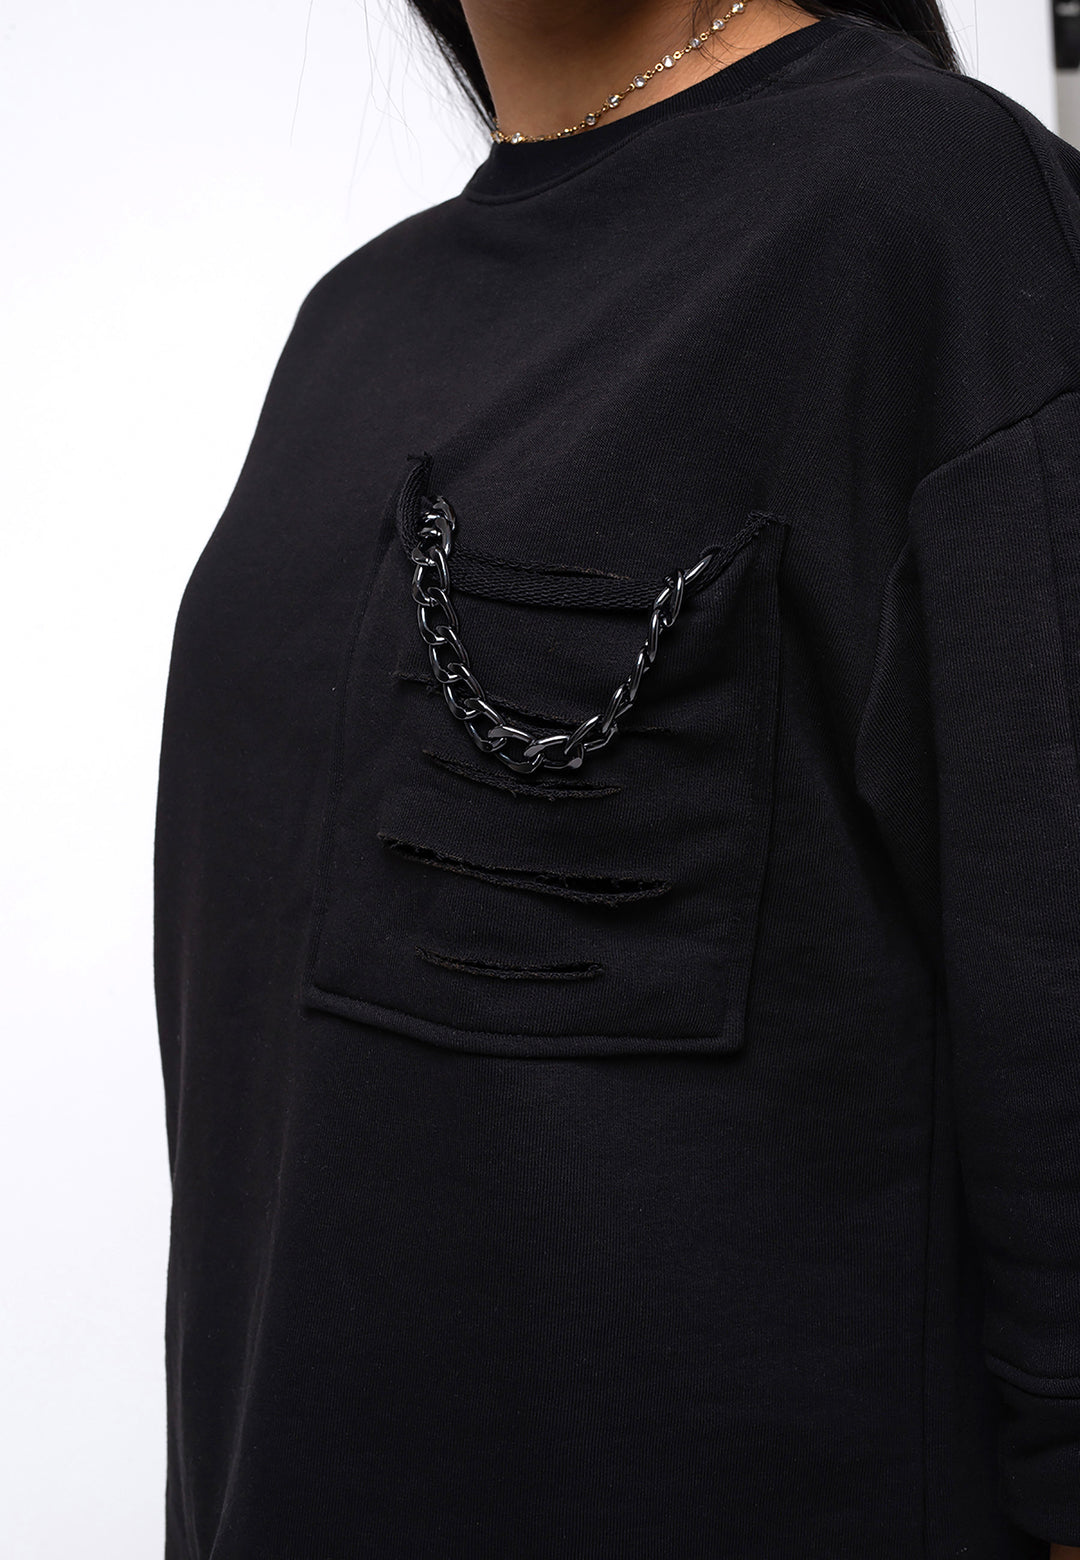 Tracksuit 'Chain